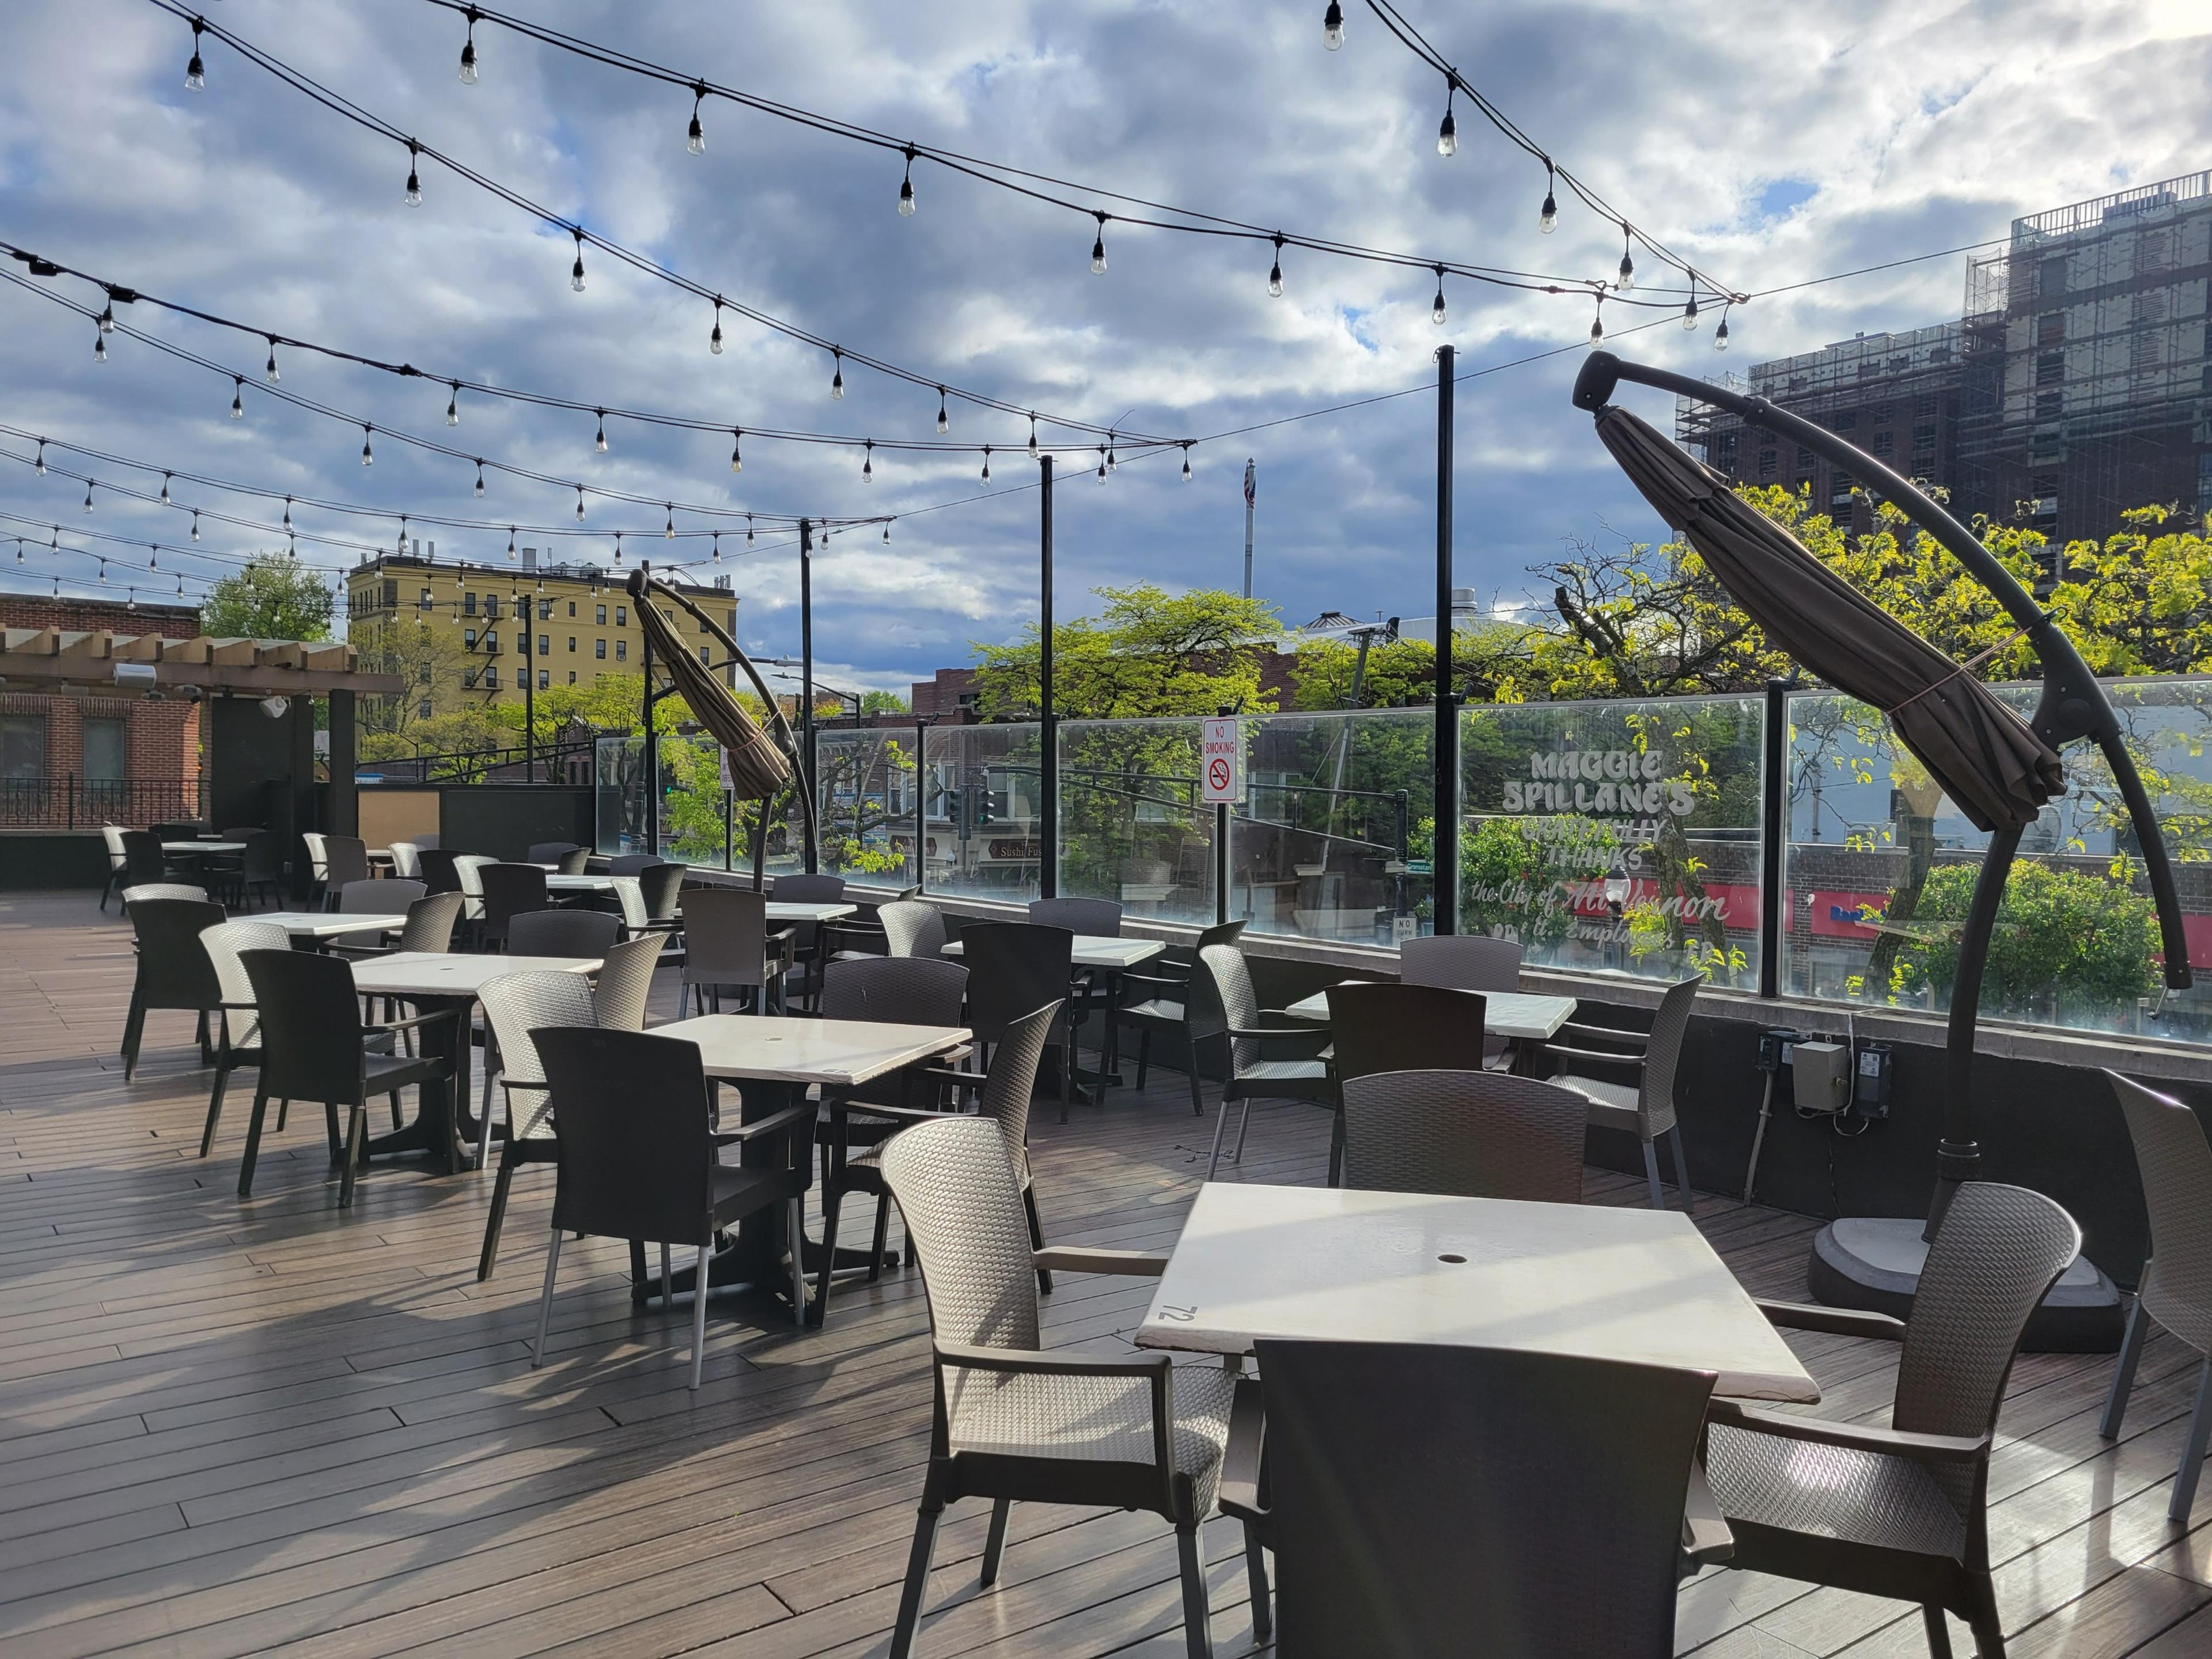 Maggie Spillane's Ale House and Rooftop